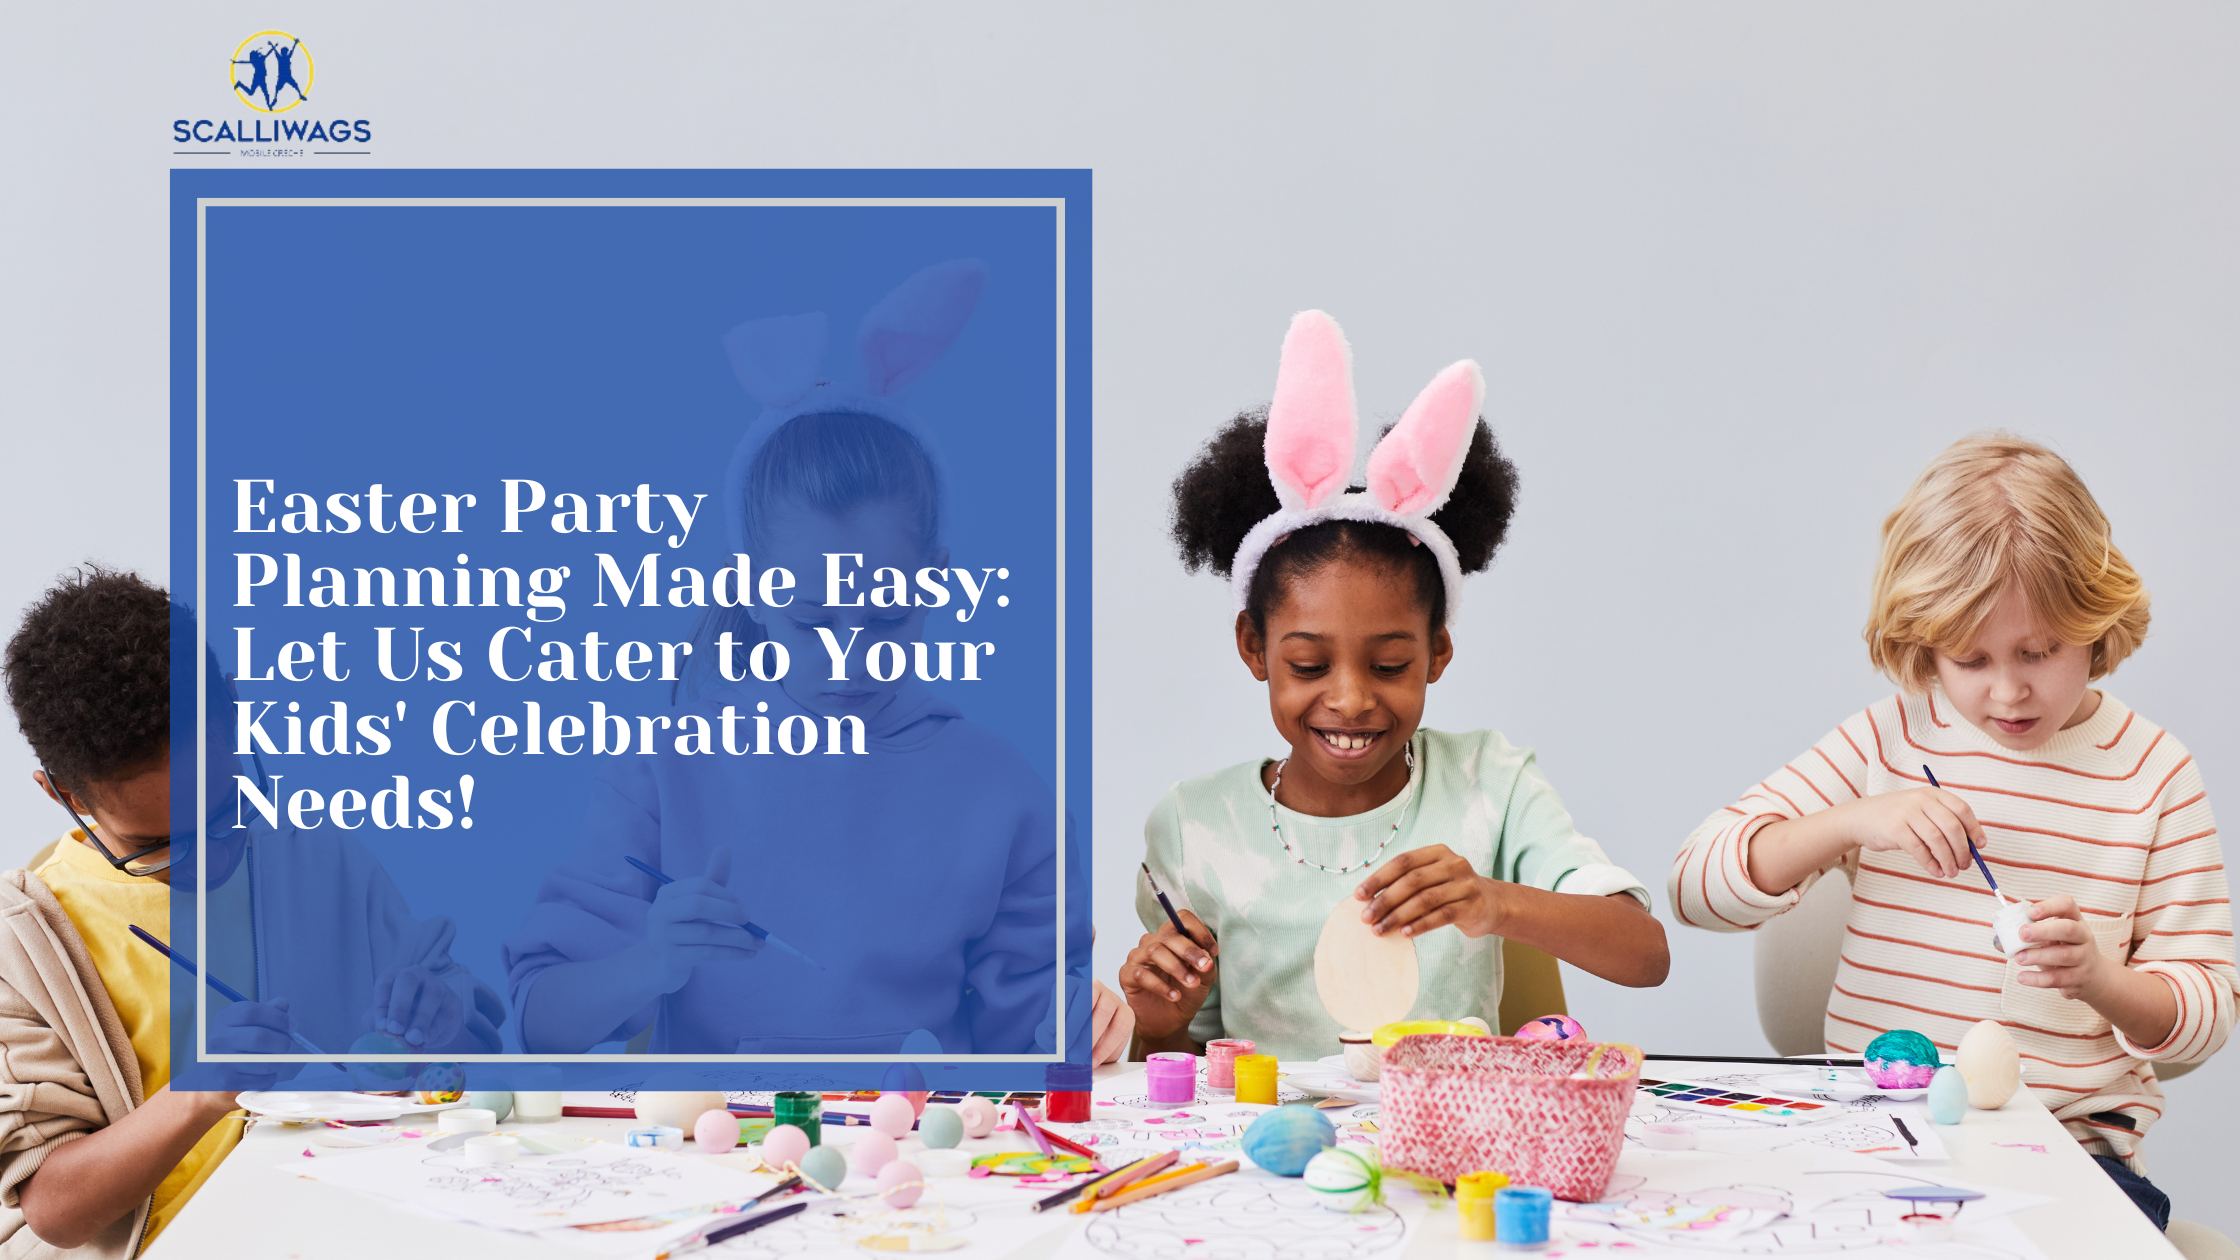 Easter Party Planning Made Easy: Let Us Cater to Your Kids' Celebration Needs! Blog